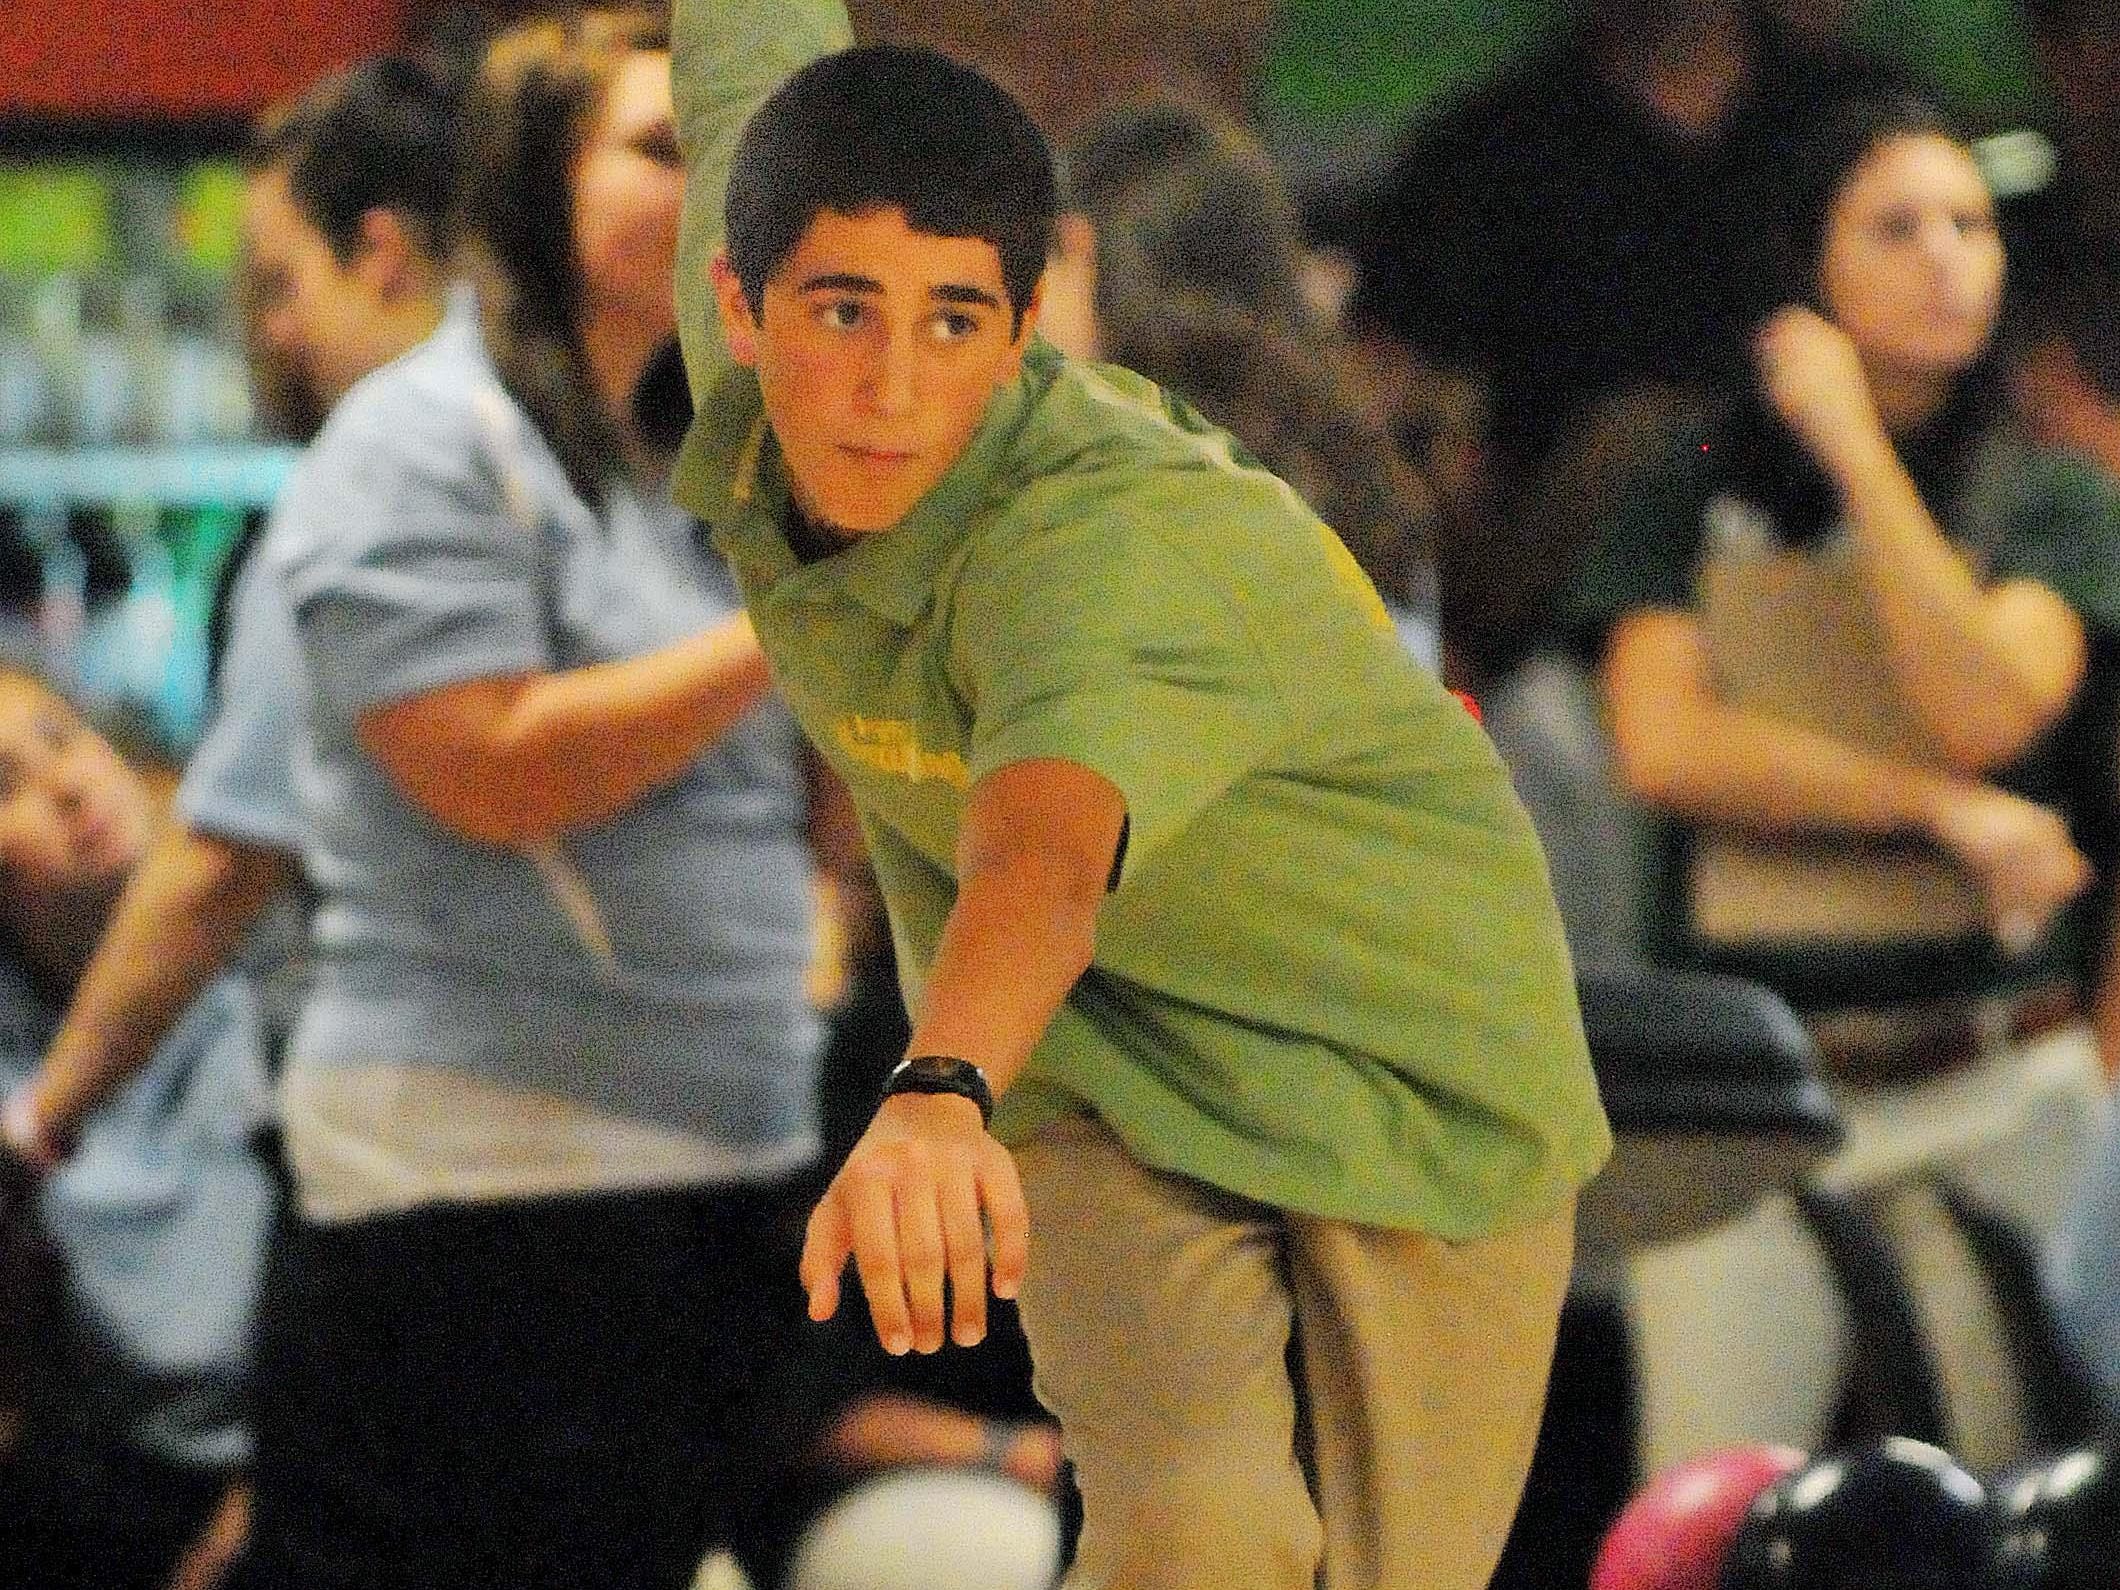 Greg Young of the Viera High bowling team learned from Sandy Finkelstein.